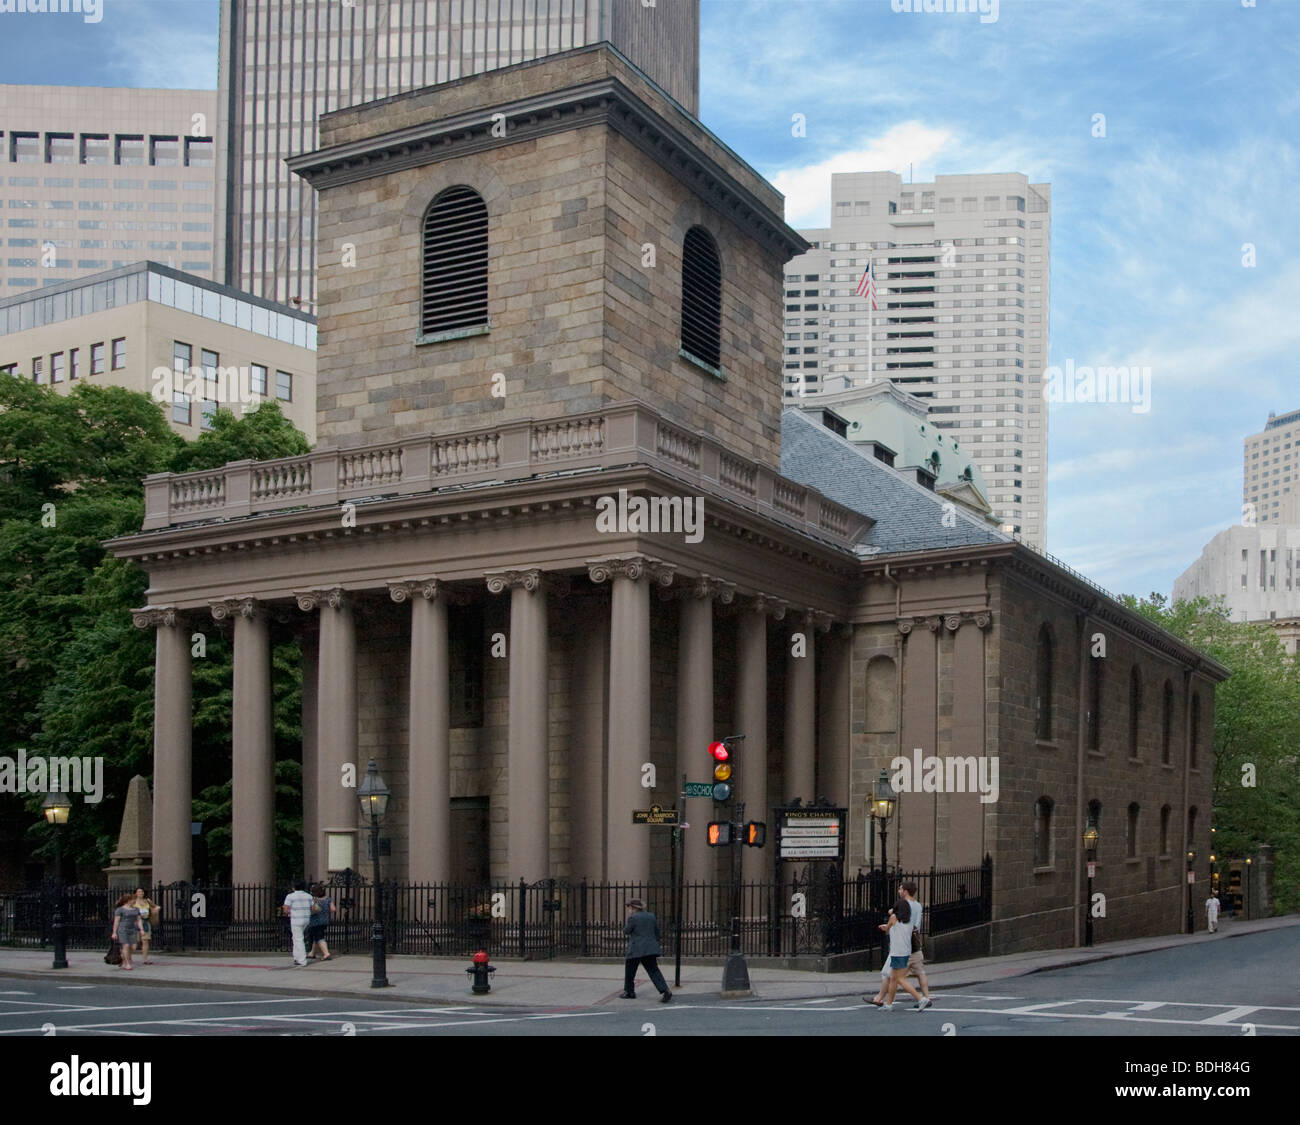 The KINGS CHAPEL is the first Anglican Church in New England founded in 1686 - BOSTON, MASSACHUSETTS Stock Photo